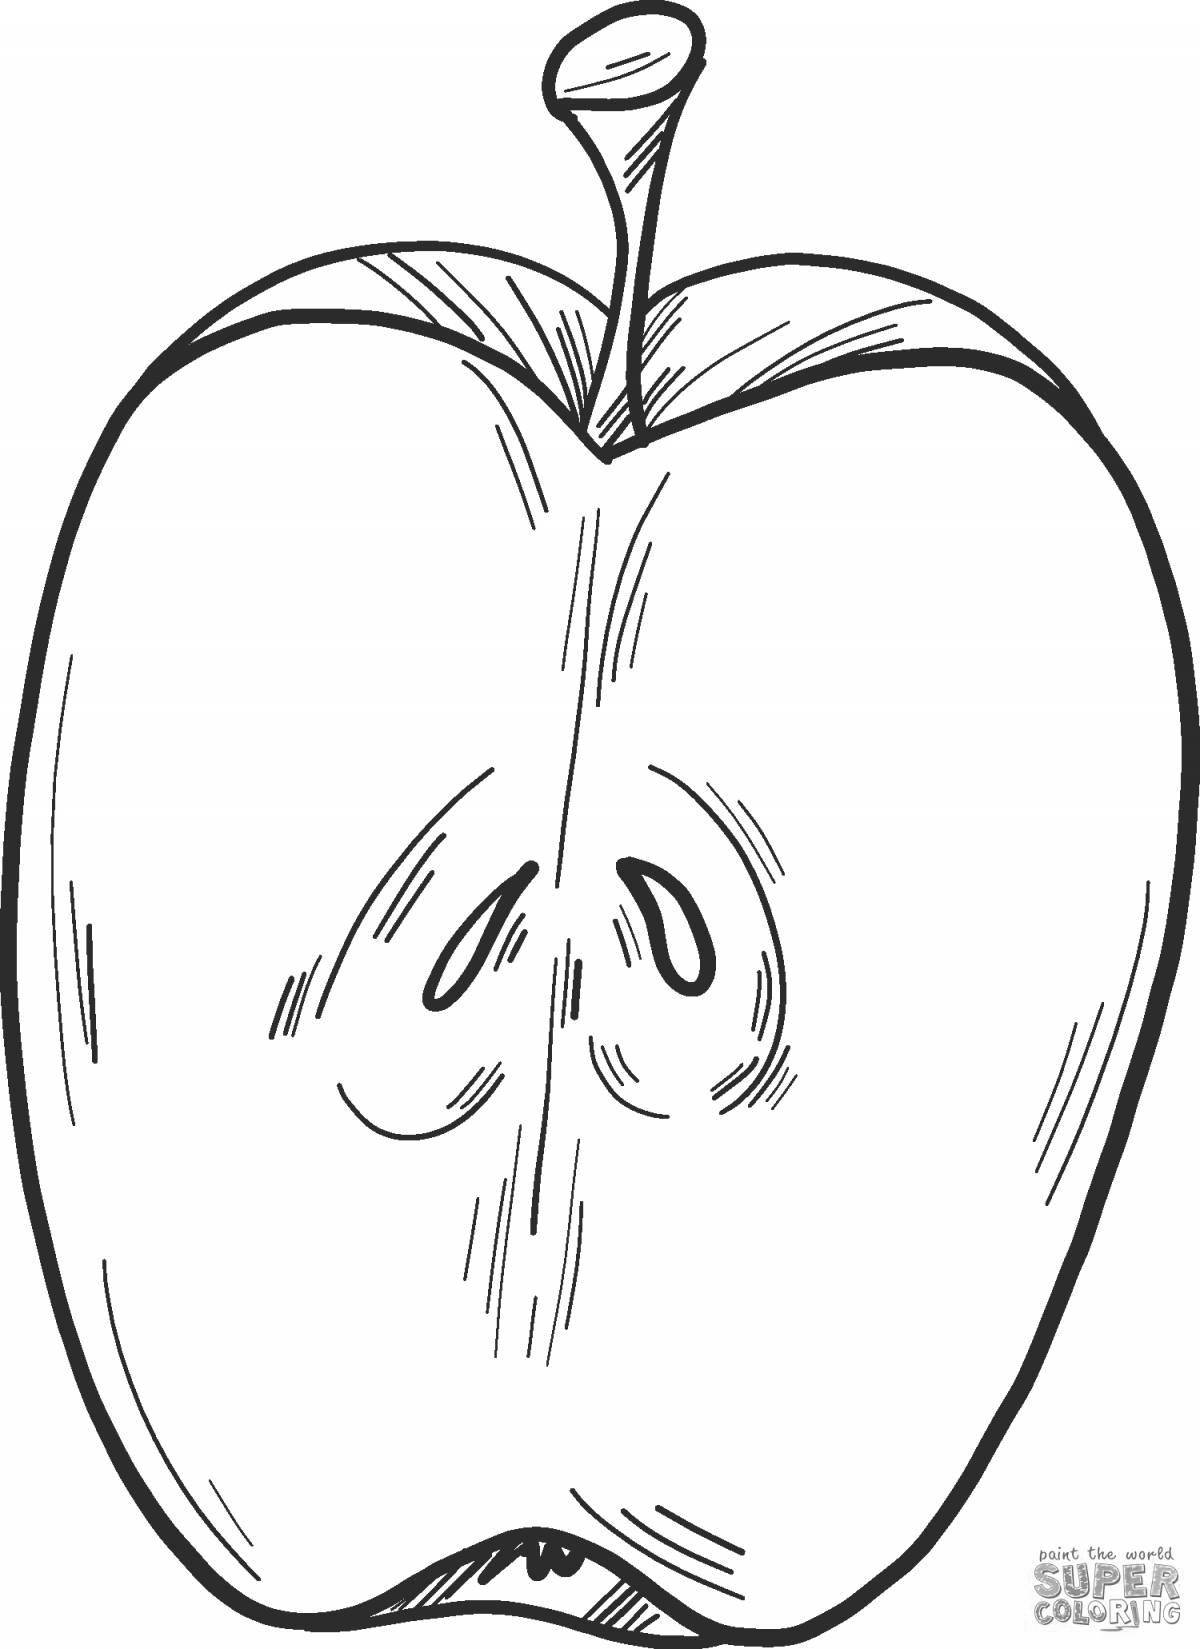 Glowing apple coloring page